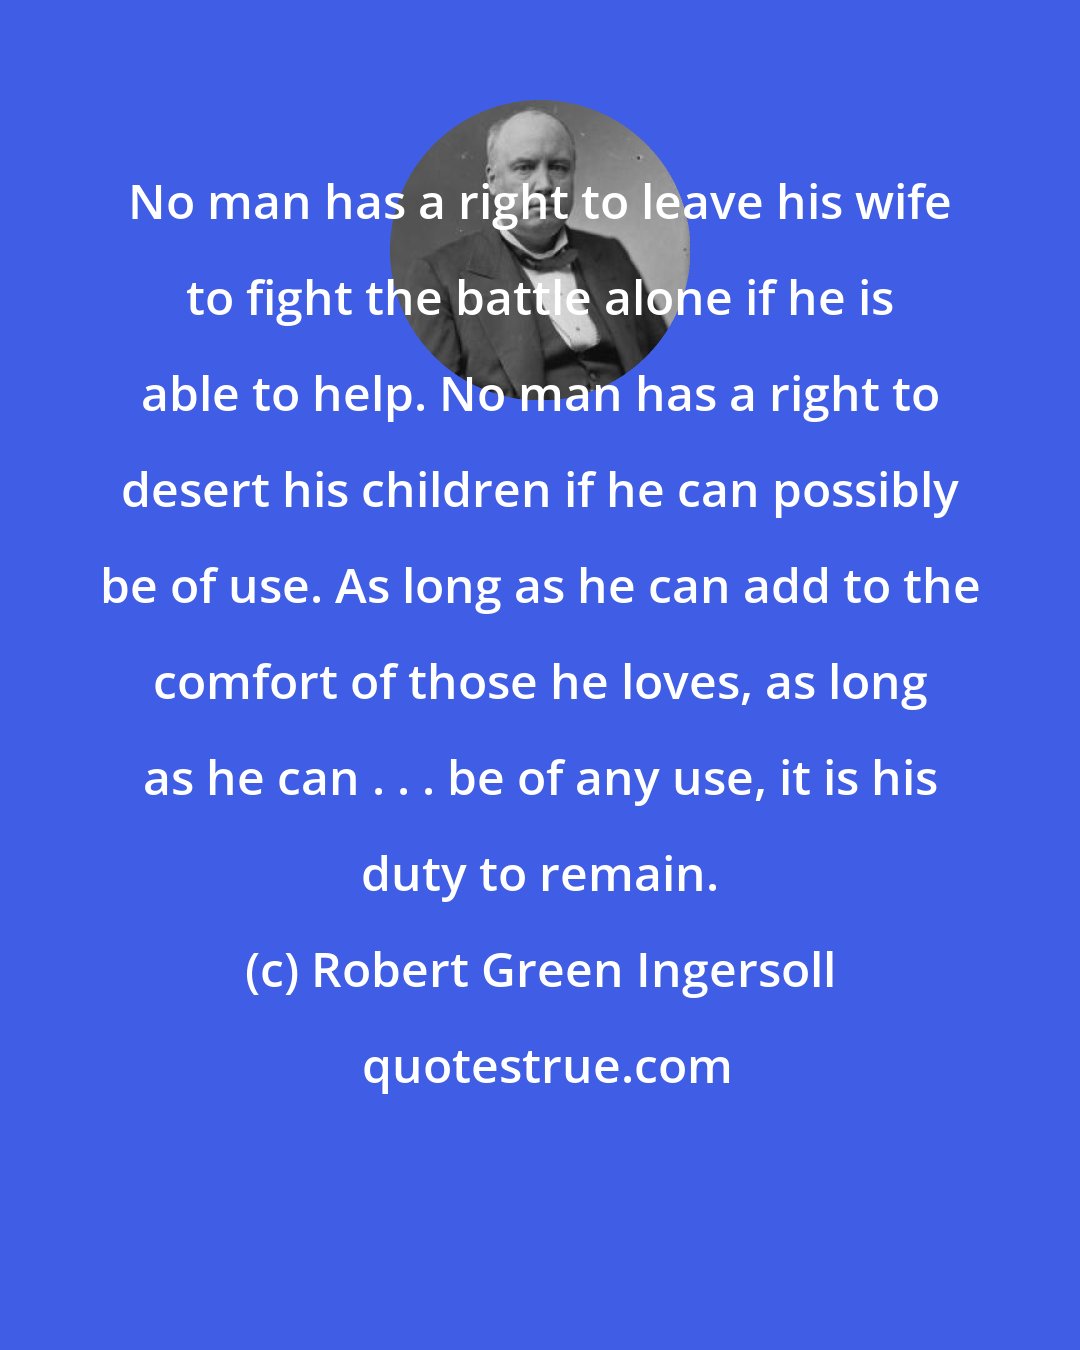 Robert Green Ingersoll: No man has a right to leave his wife to fight the battle alone if he is able to help. No man has a right to desert his children if he can possibly be of use. As long as he can add to the comfort of those he loves, as long as he can . . . be of any use, it is his duty to remain.